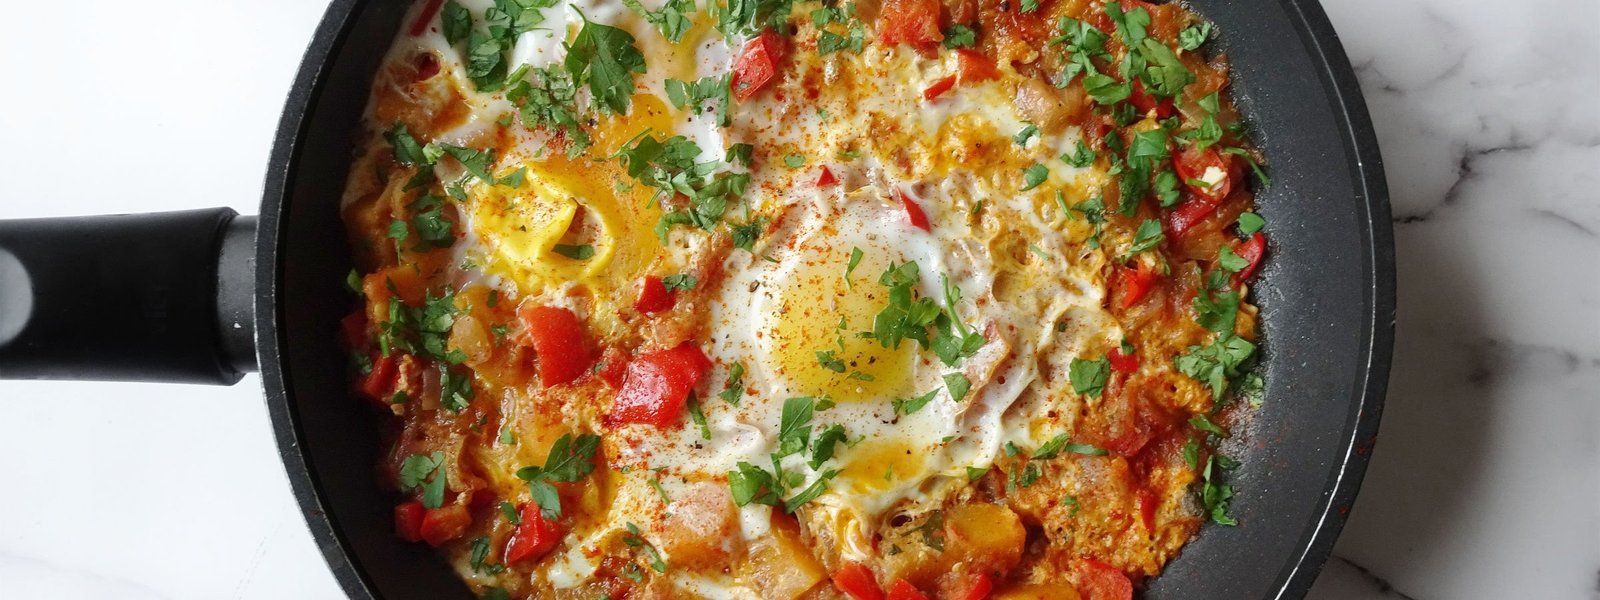 A frying pan of vegetable pisto with eggs sits on a marble counter